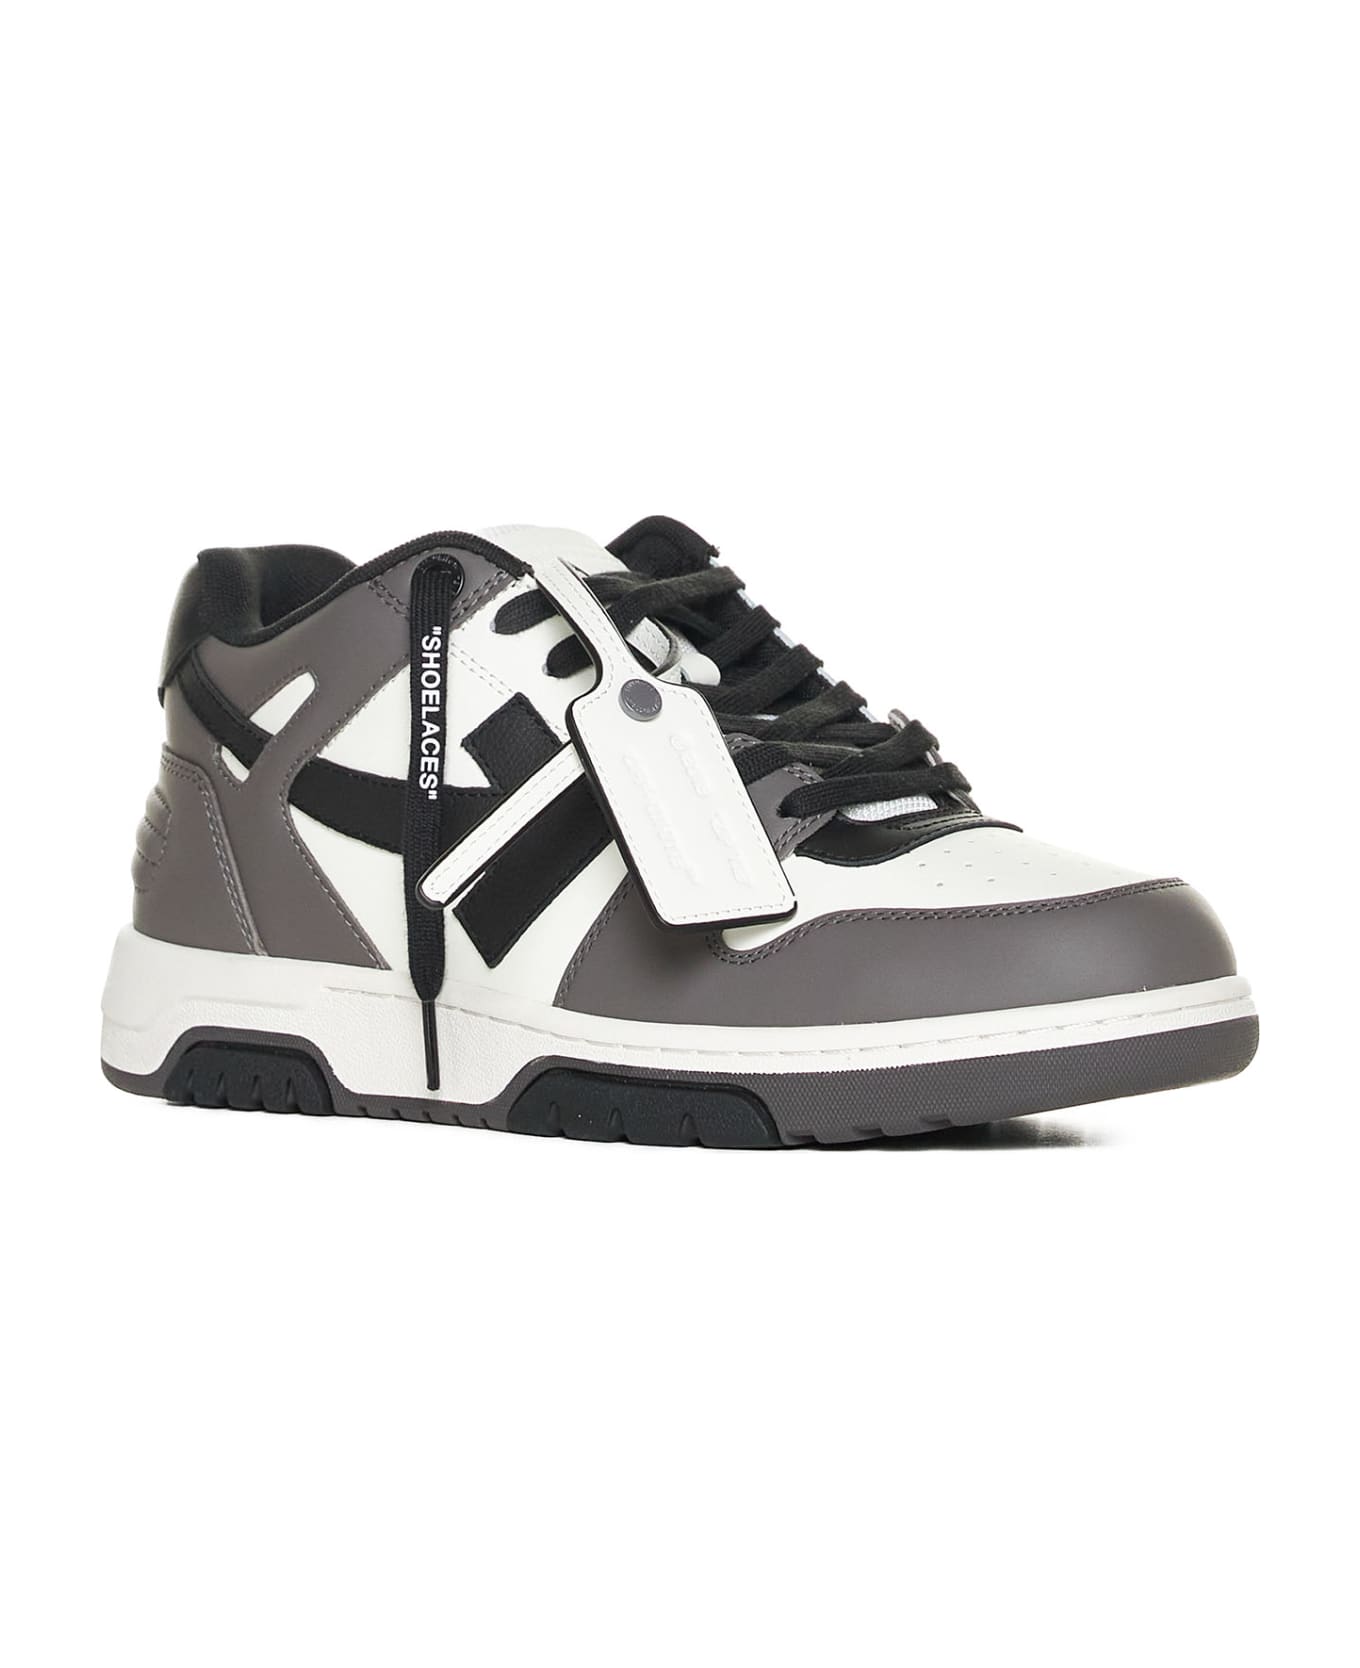 Off-White Out Of Office Low Top Sneakers - Dark grey black